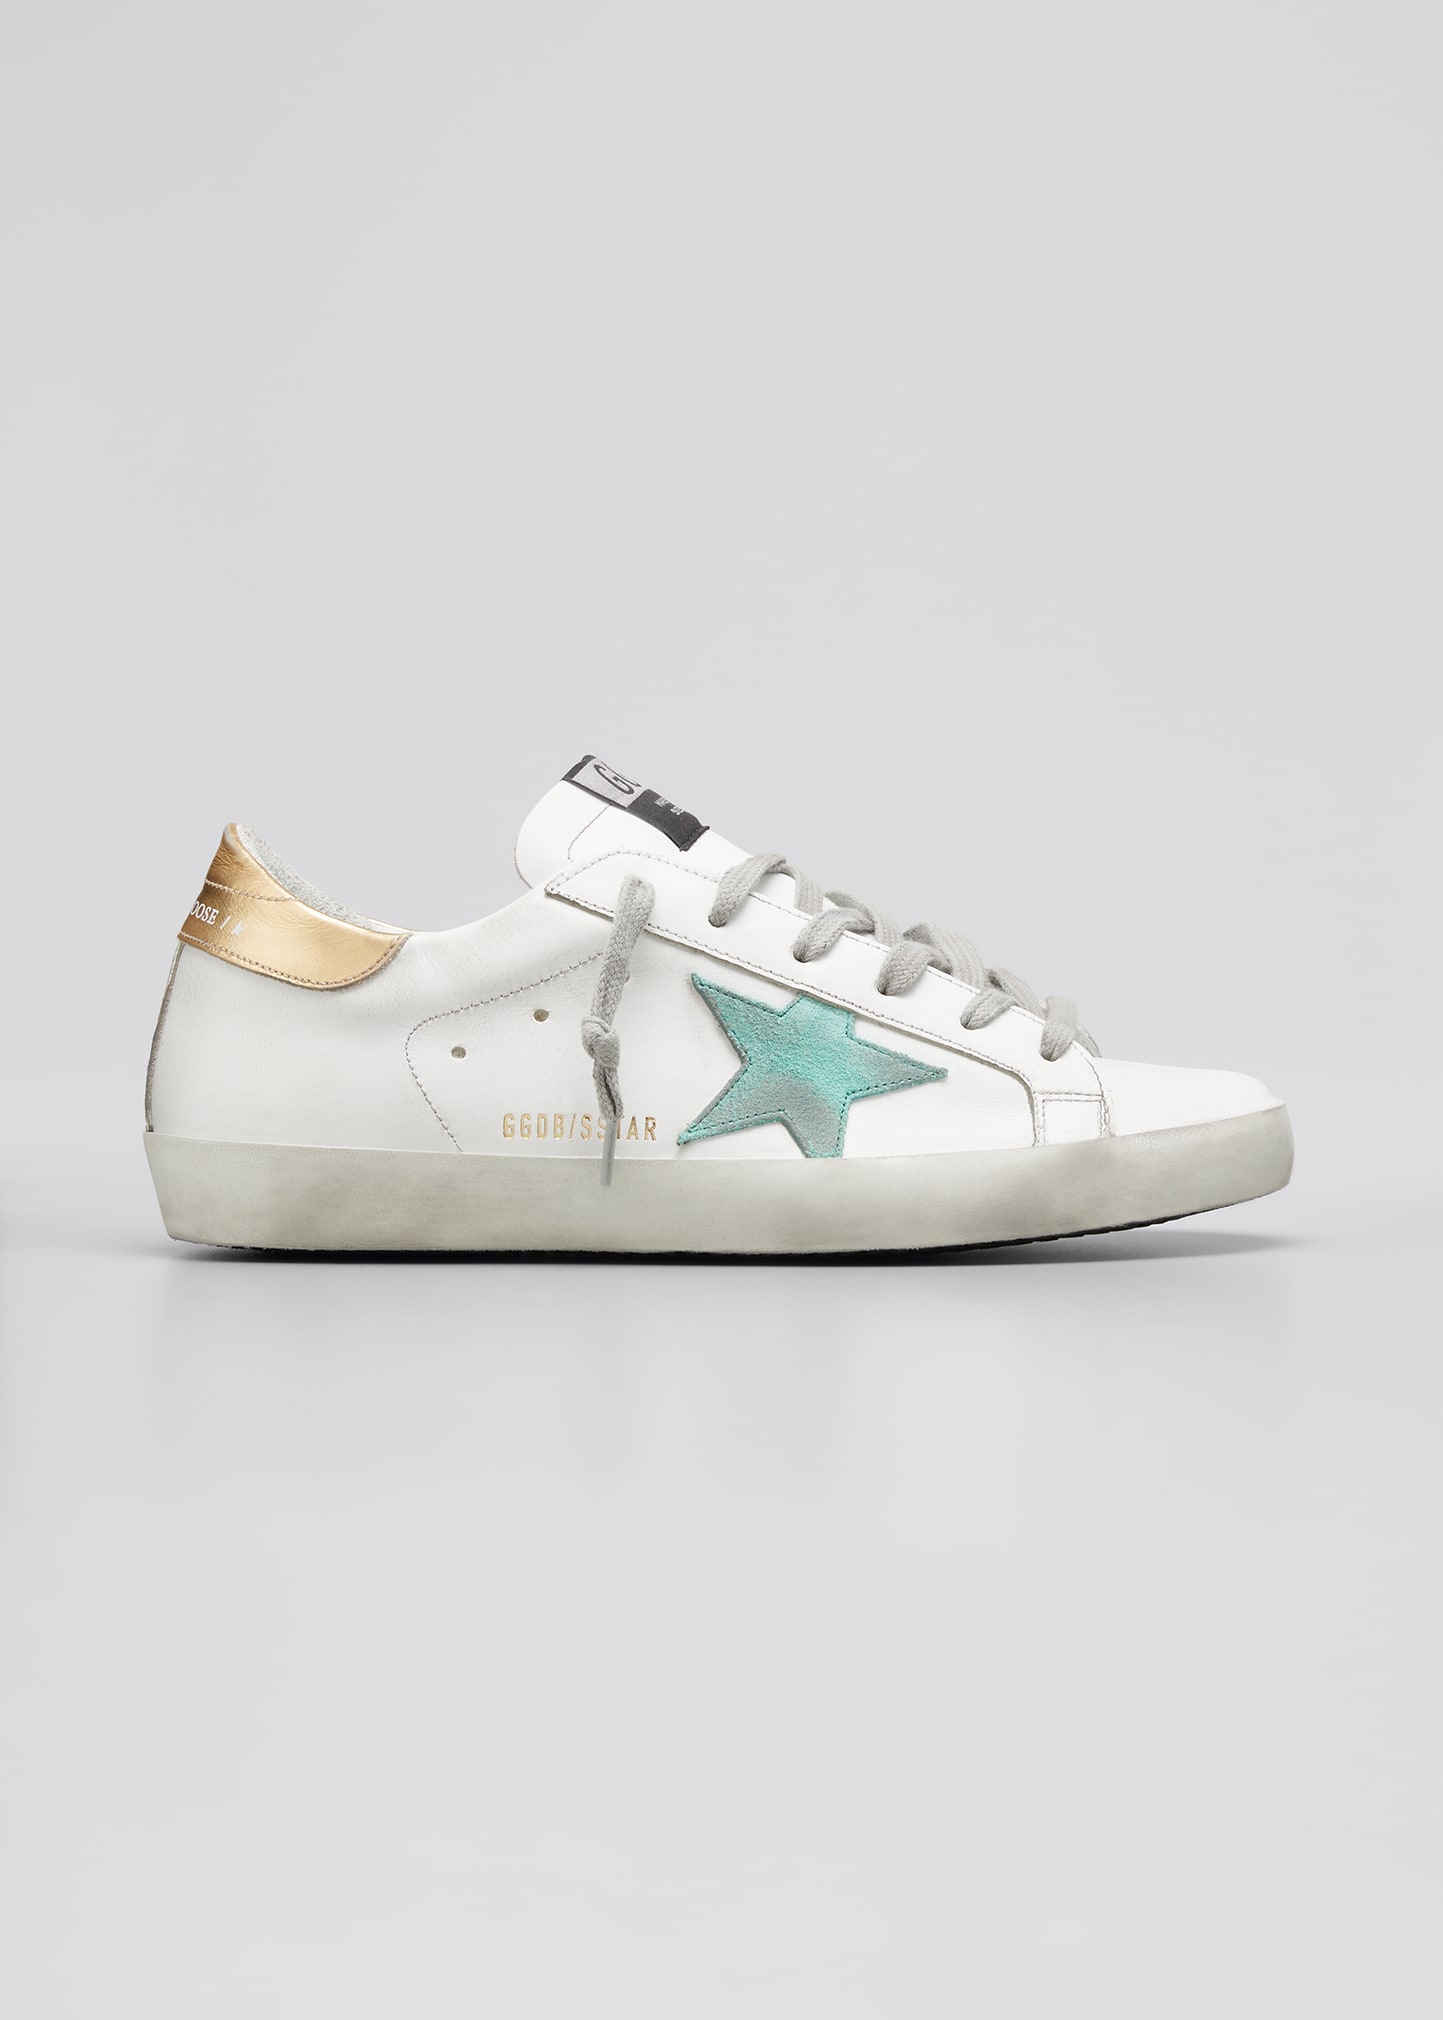 cheapest golden goose sneakers